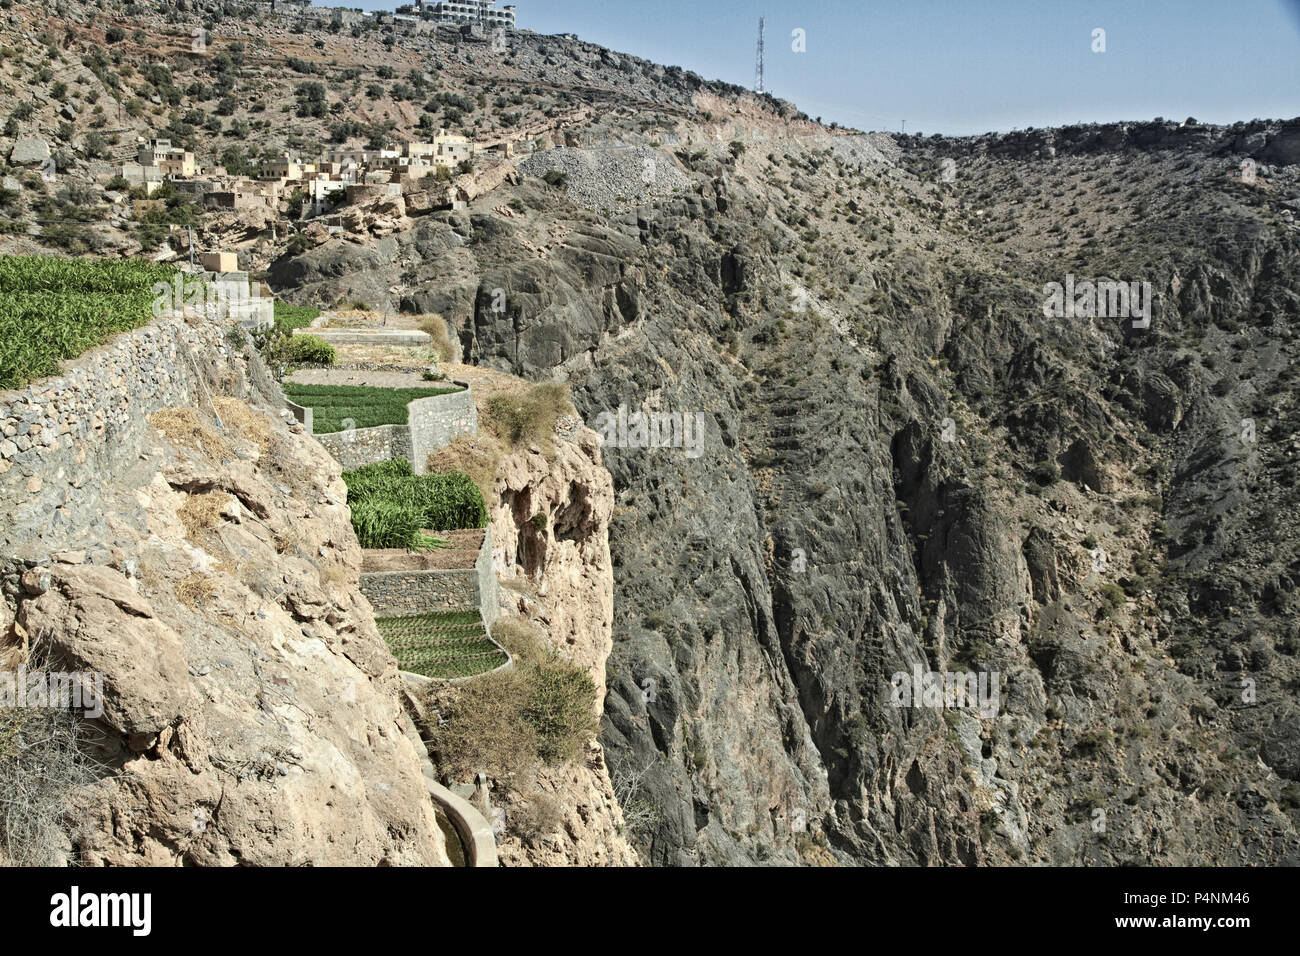 View of small rural villages situated on the saiq plateau at the jebel akhdar mountain in Oman Stock Photo